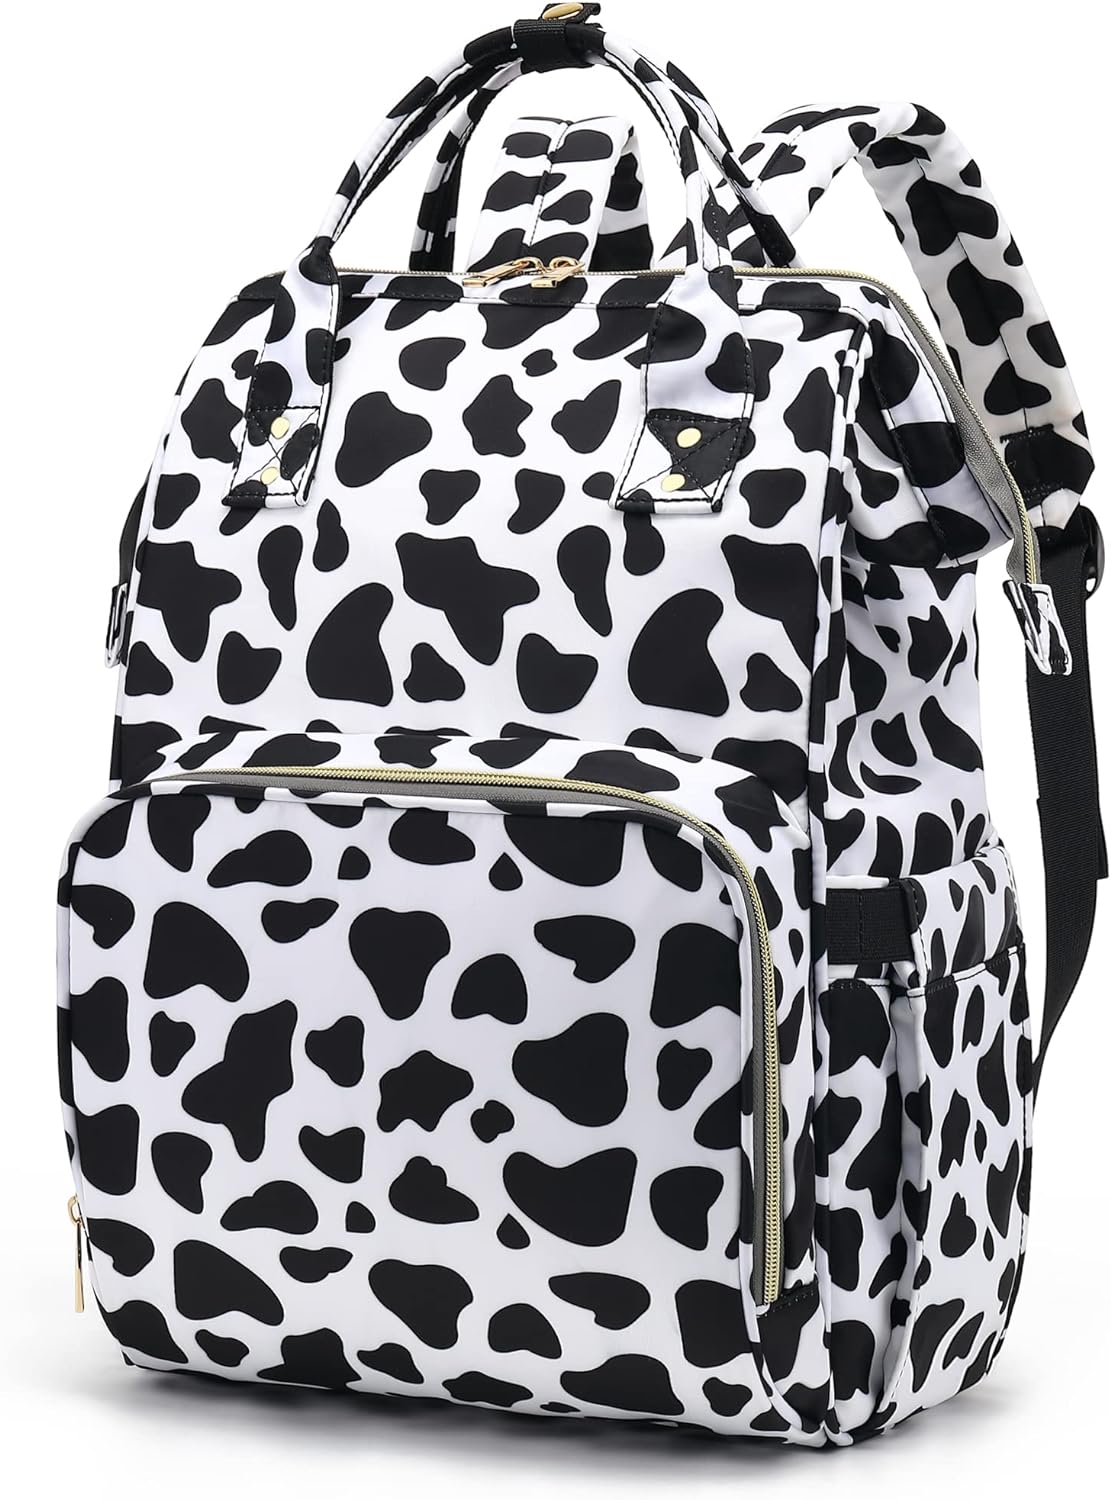 Cow Print Laptop Backpack for Women's Girls, College Backpacks.